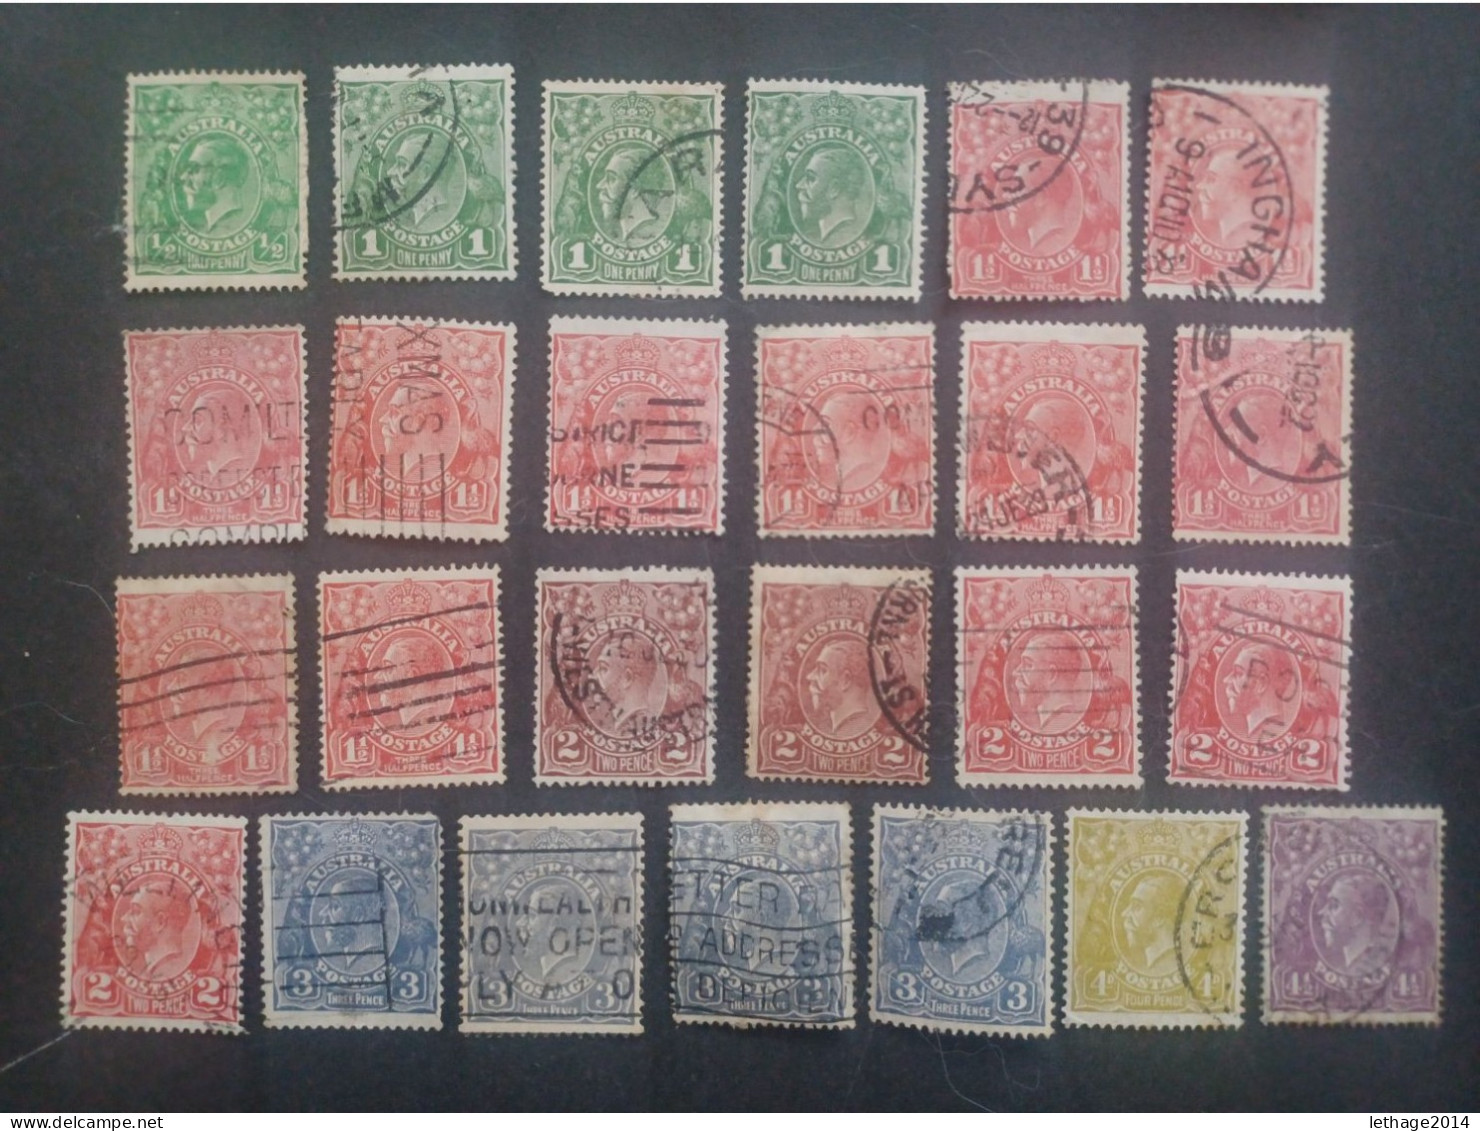 AUSTRALIA 1913 KANGOROO + KING GEORGE V + STOCK LOT MIX 33 SCANNERS MANY STAMPS FRAGMANT PERFIN - Collezioni